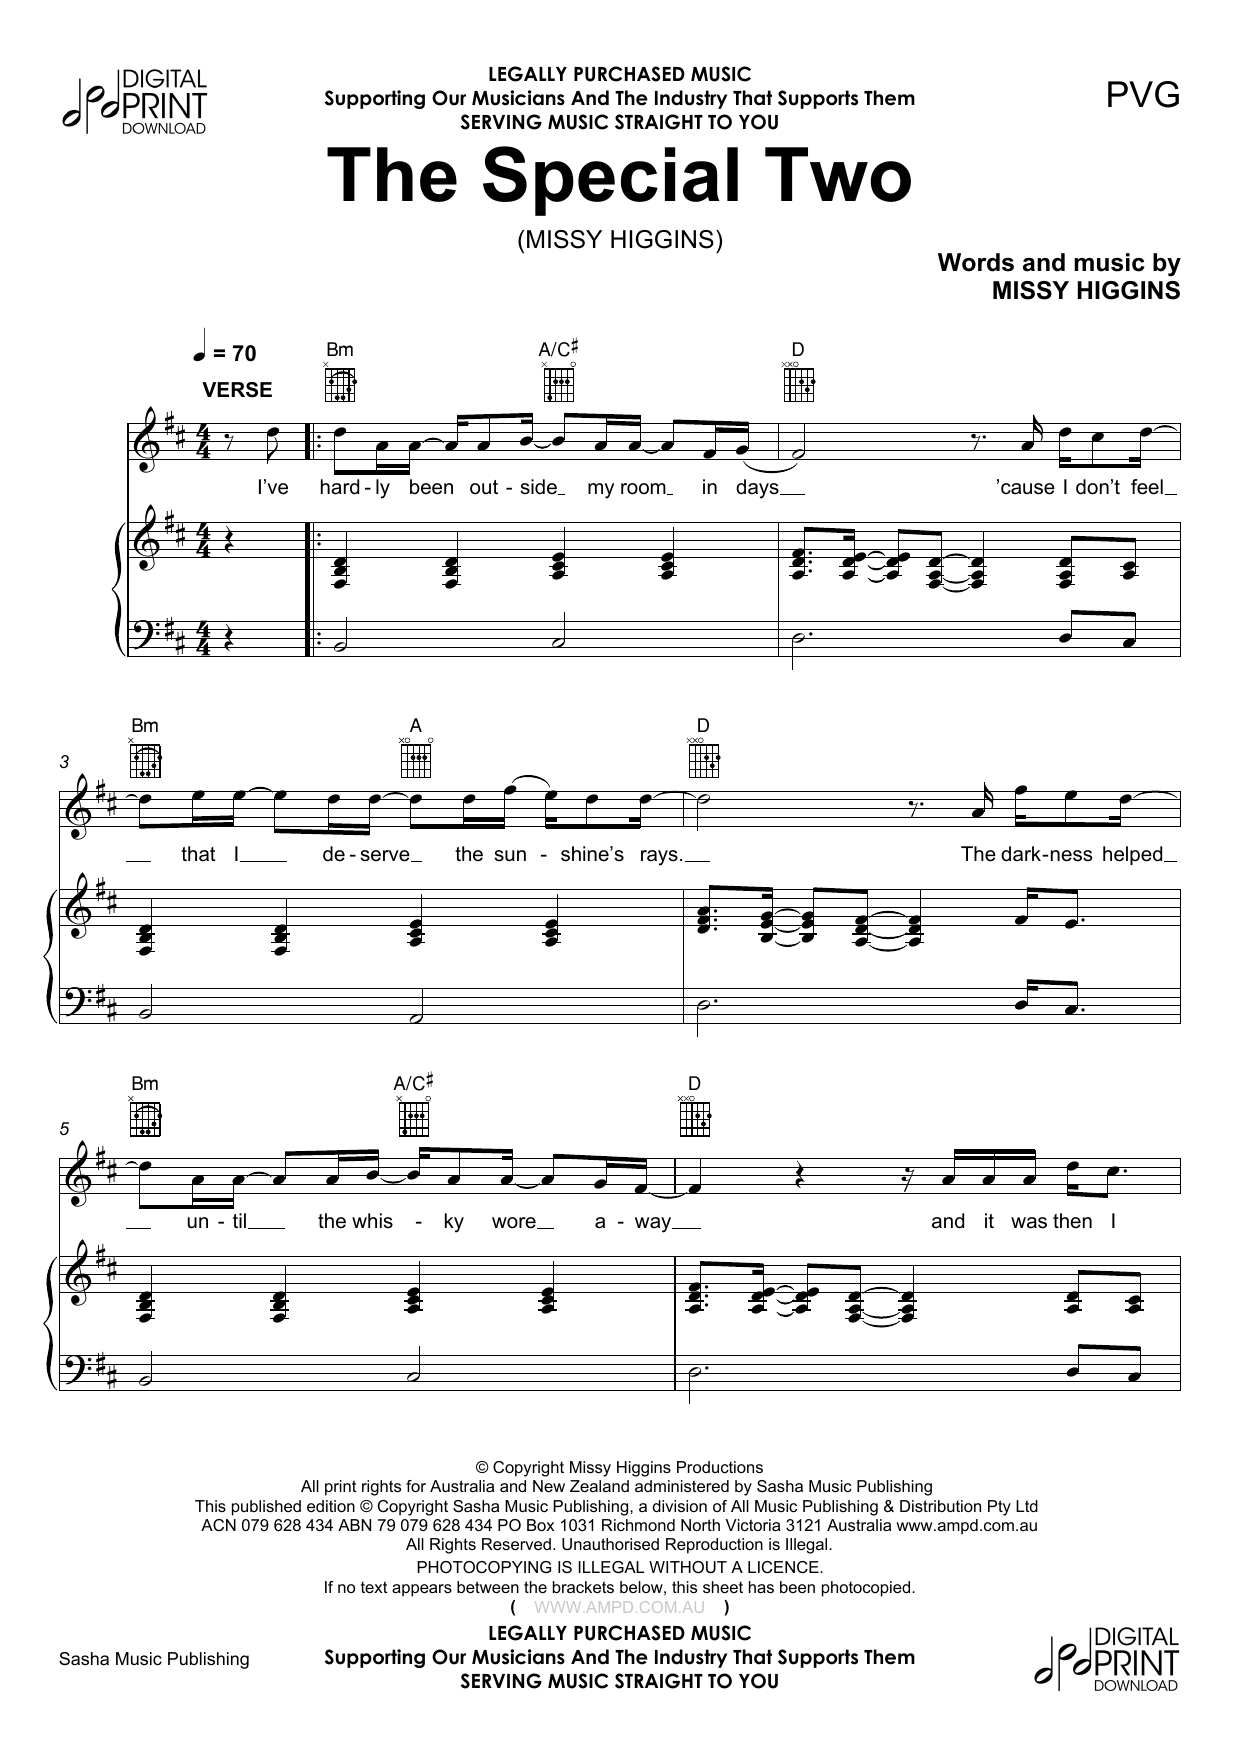 Download Missy Higgins Special Two Sheet Music